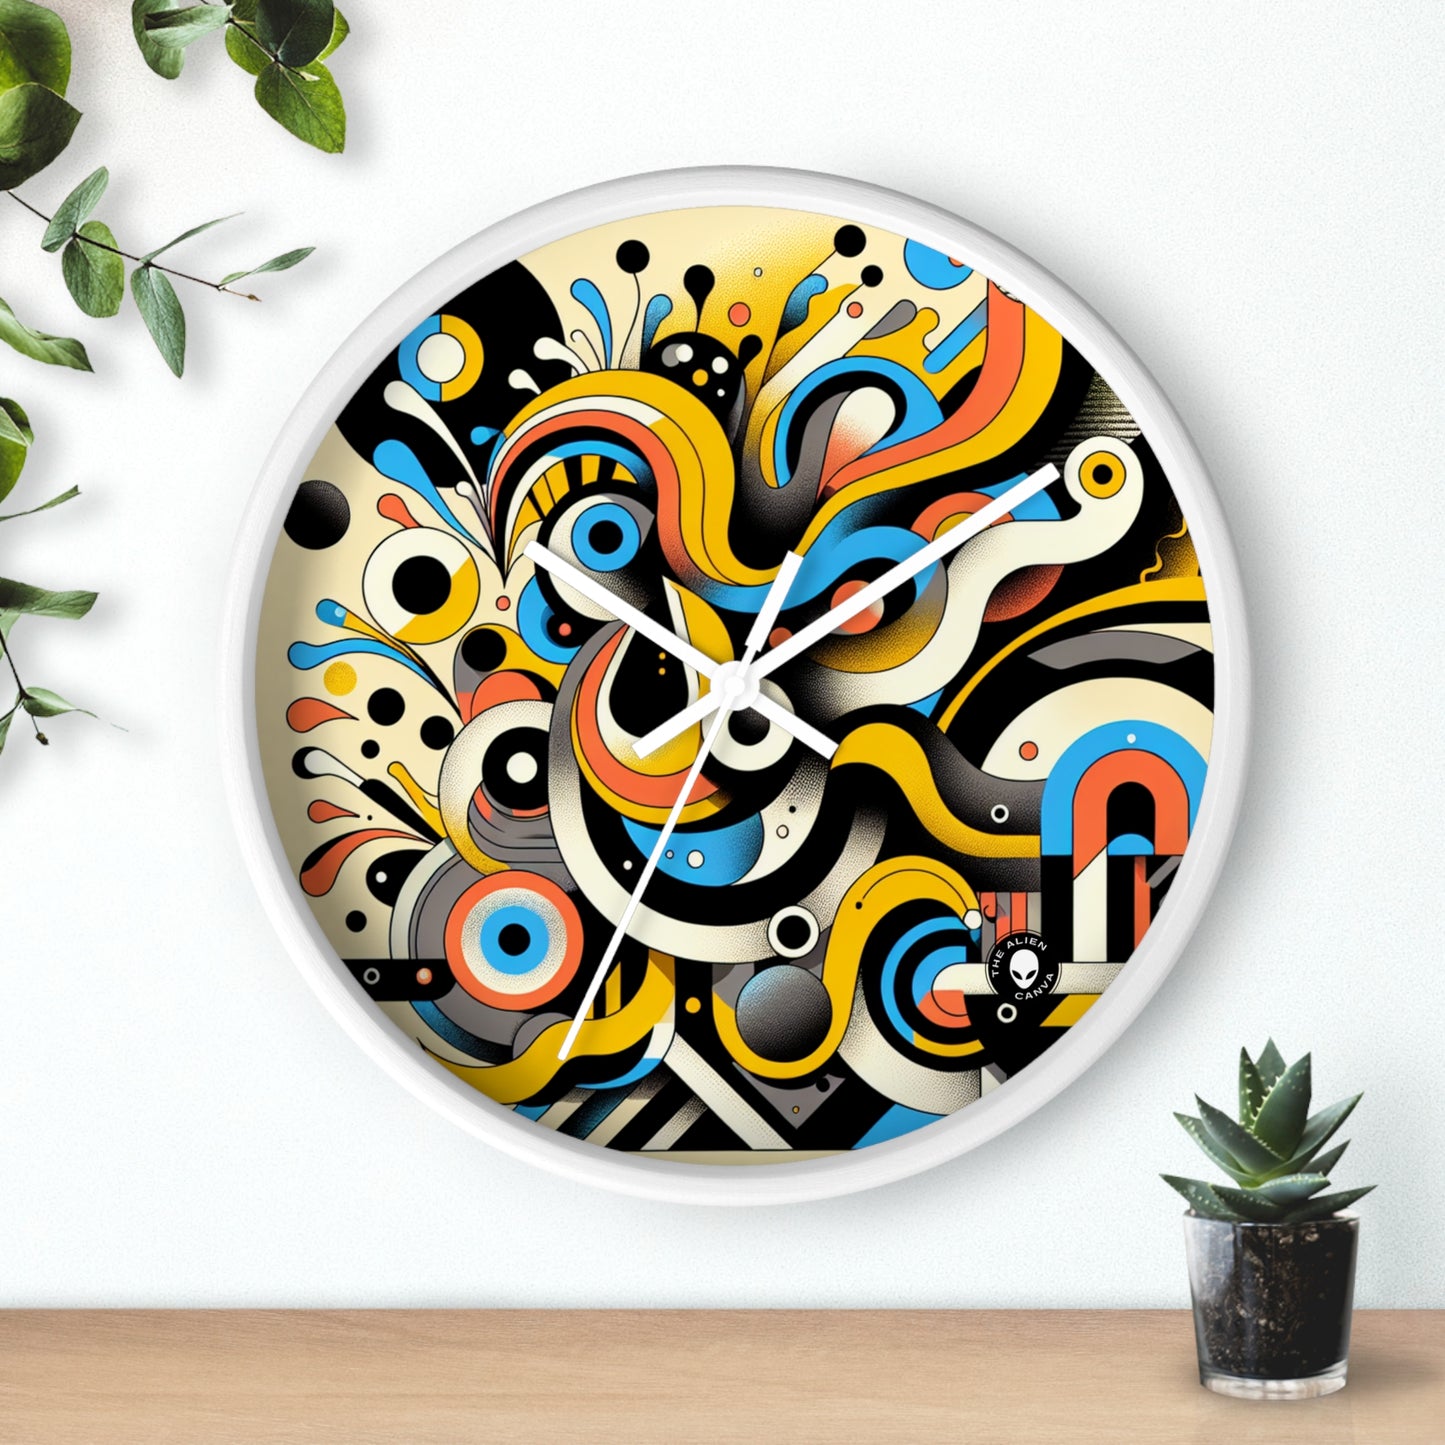 "Dada Fusion: A Whimsical Chaos of Everyday Objects" - The Alien Wall Clock Neo-Dada